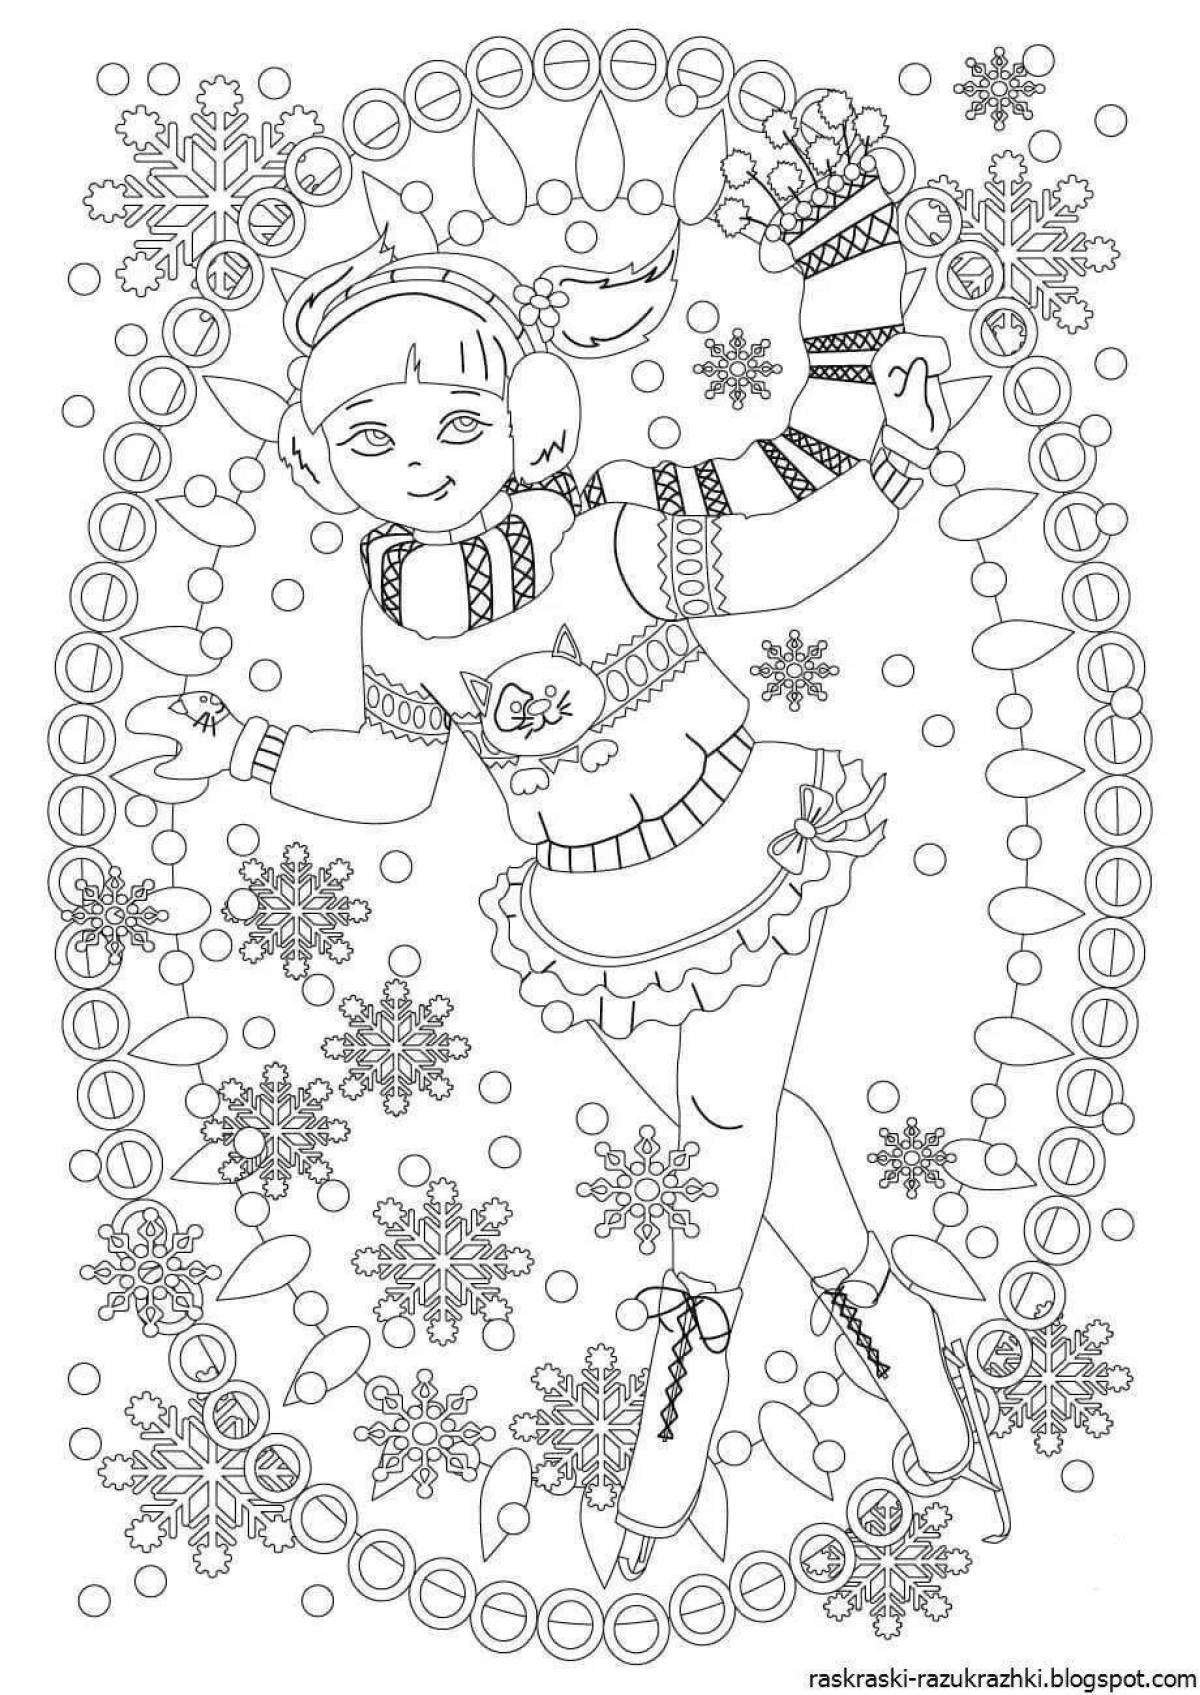 Whimsical Christmas coloring book for 12 year old girls